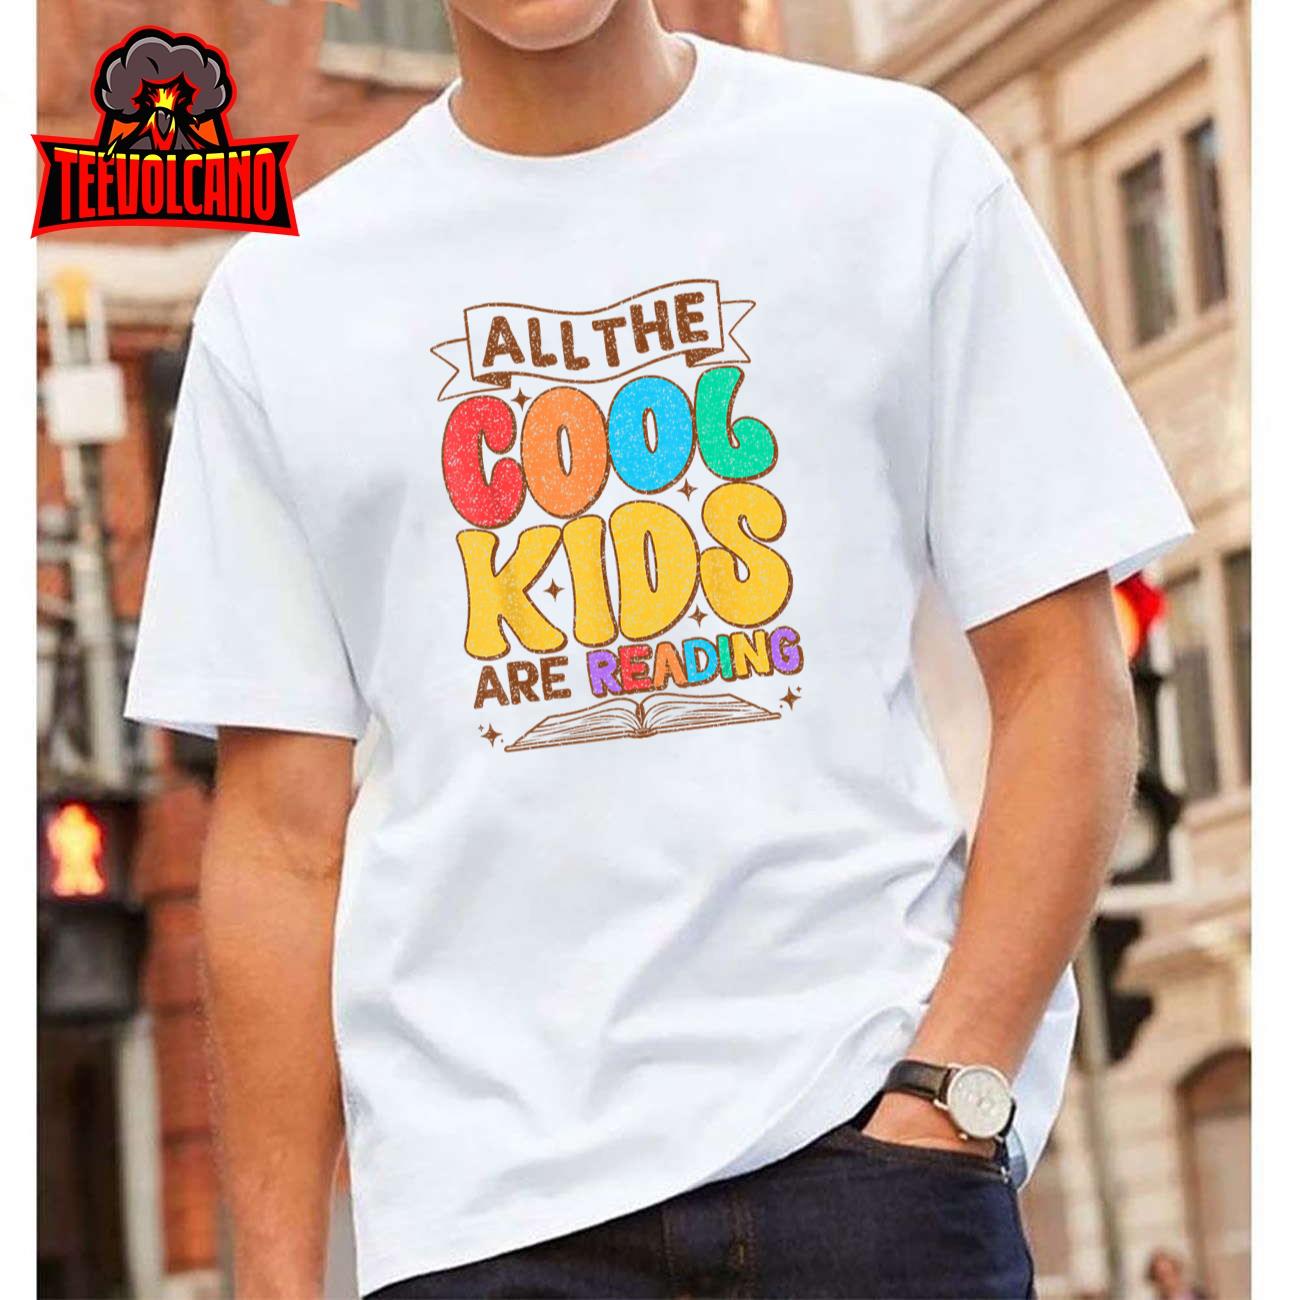 All The Cool Kids Are Reading Book Reading Teacher School T-Shirt